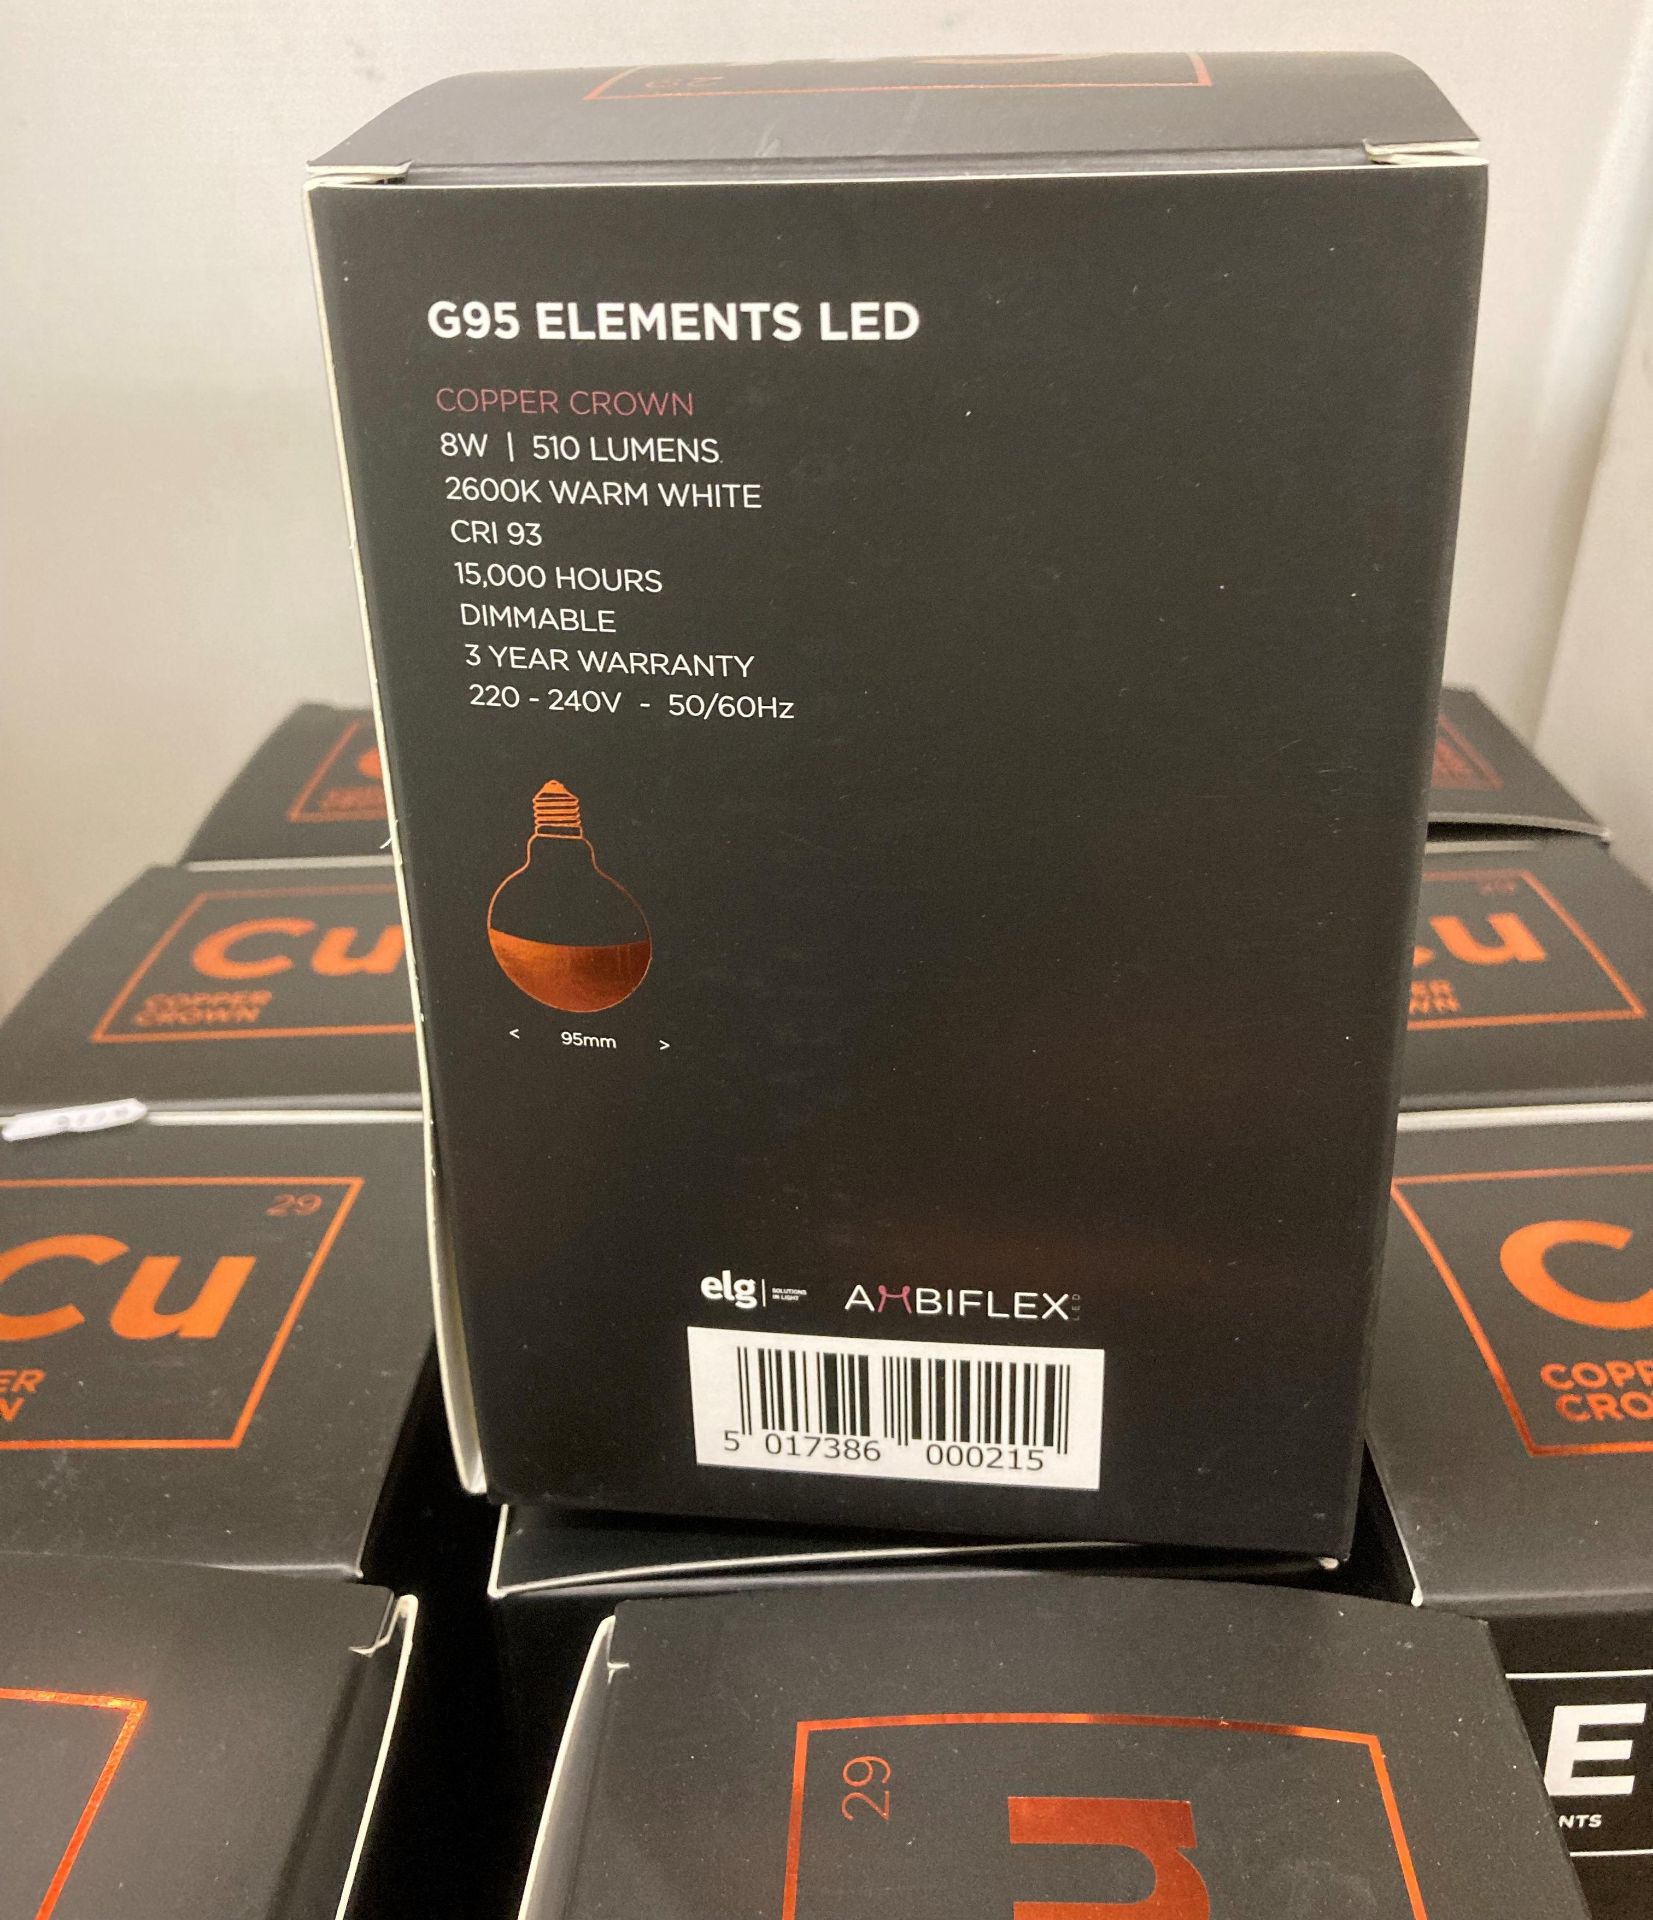 12 x Cu Copper Crown G95 elements LED 8W dimmer bulbs, 510 lumens 2,600K warm white 15, - Image 2 of 2